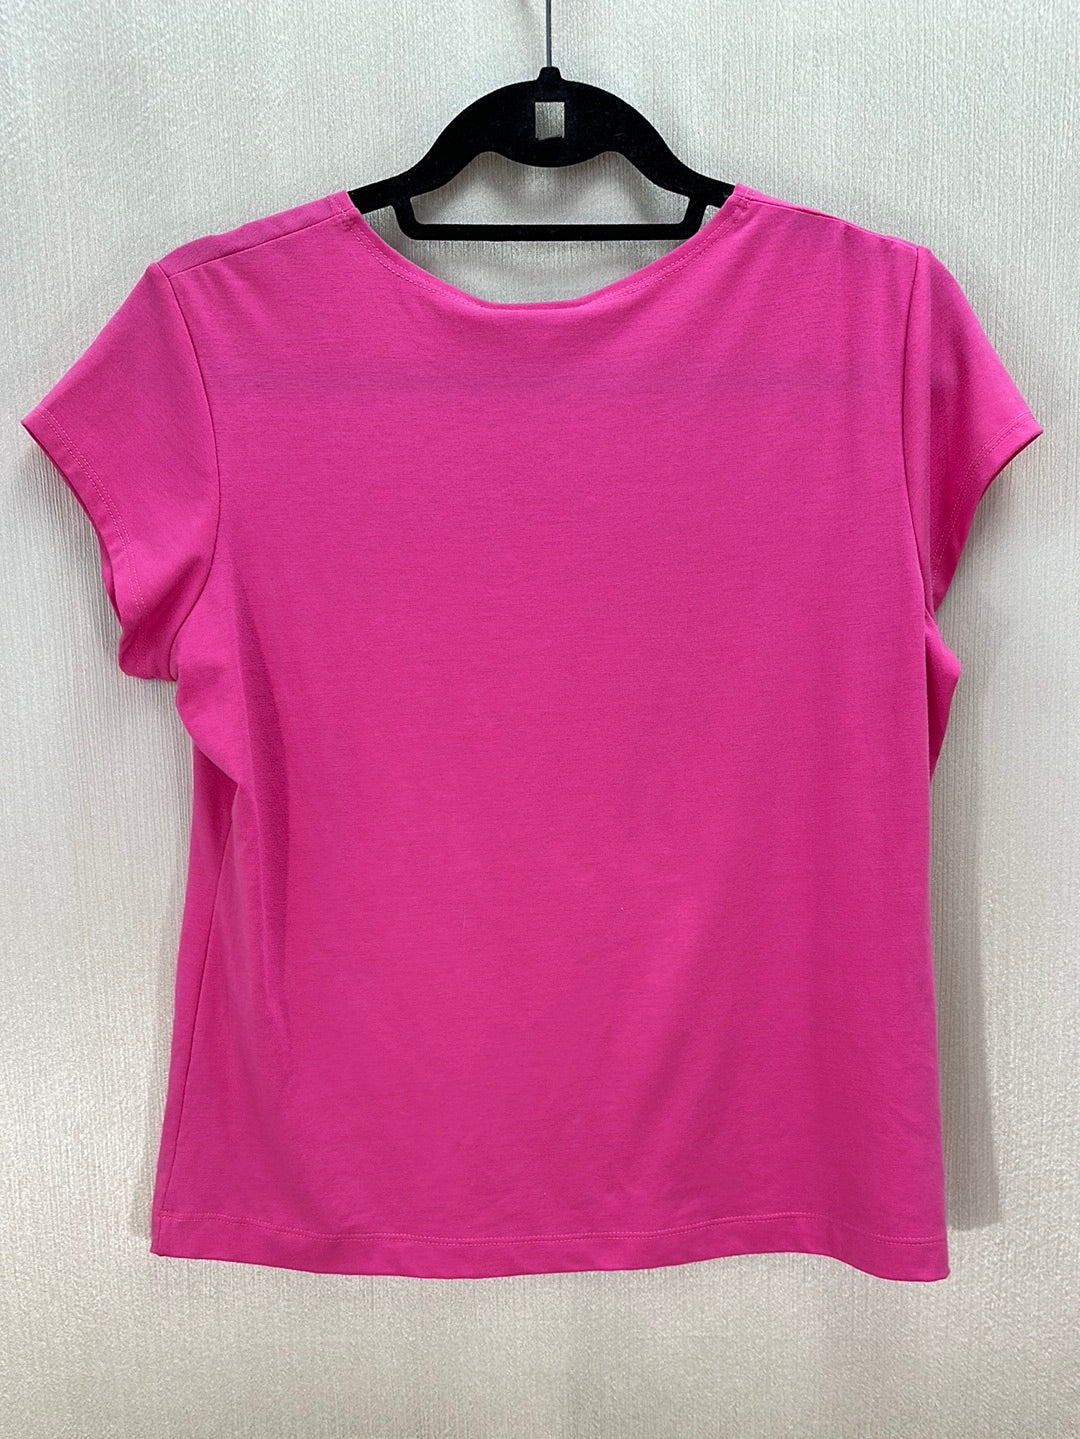 NWT - COLDWATER CREEK pink Rayon Blend Short Sleeve T-Shirt - S